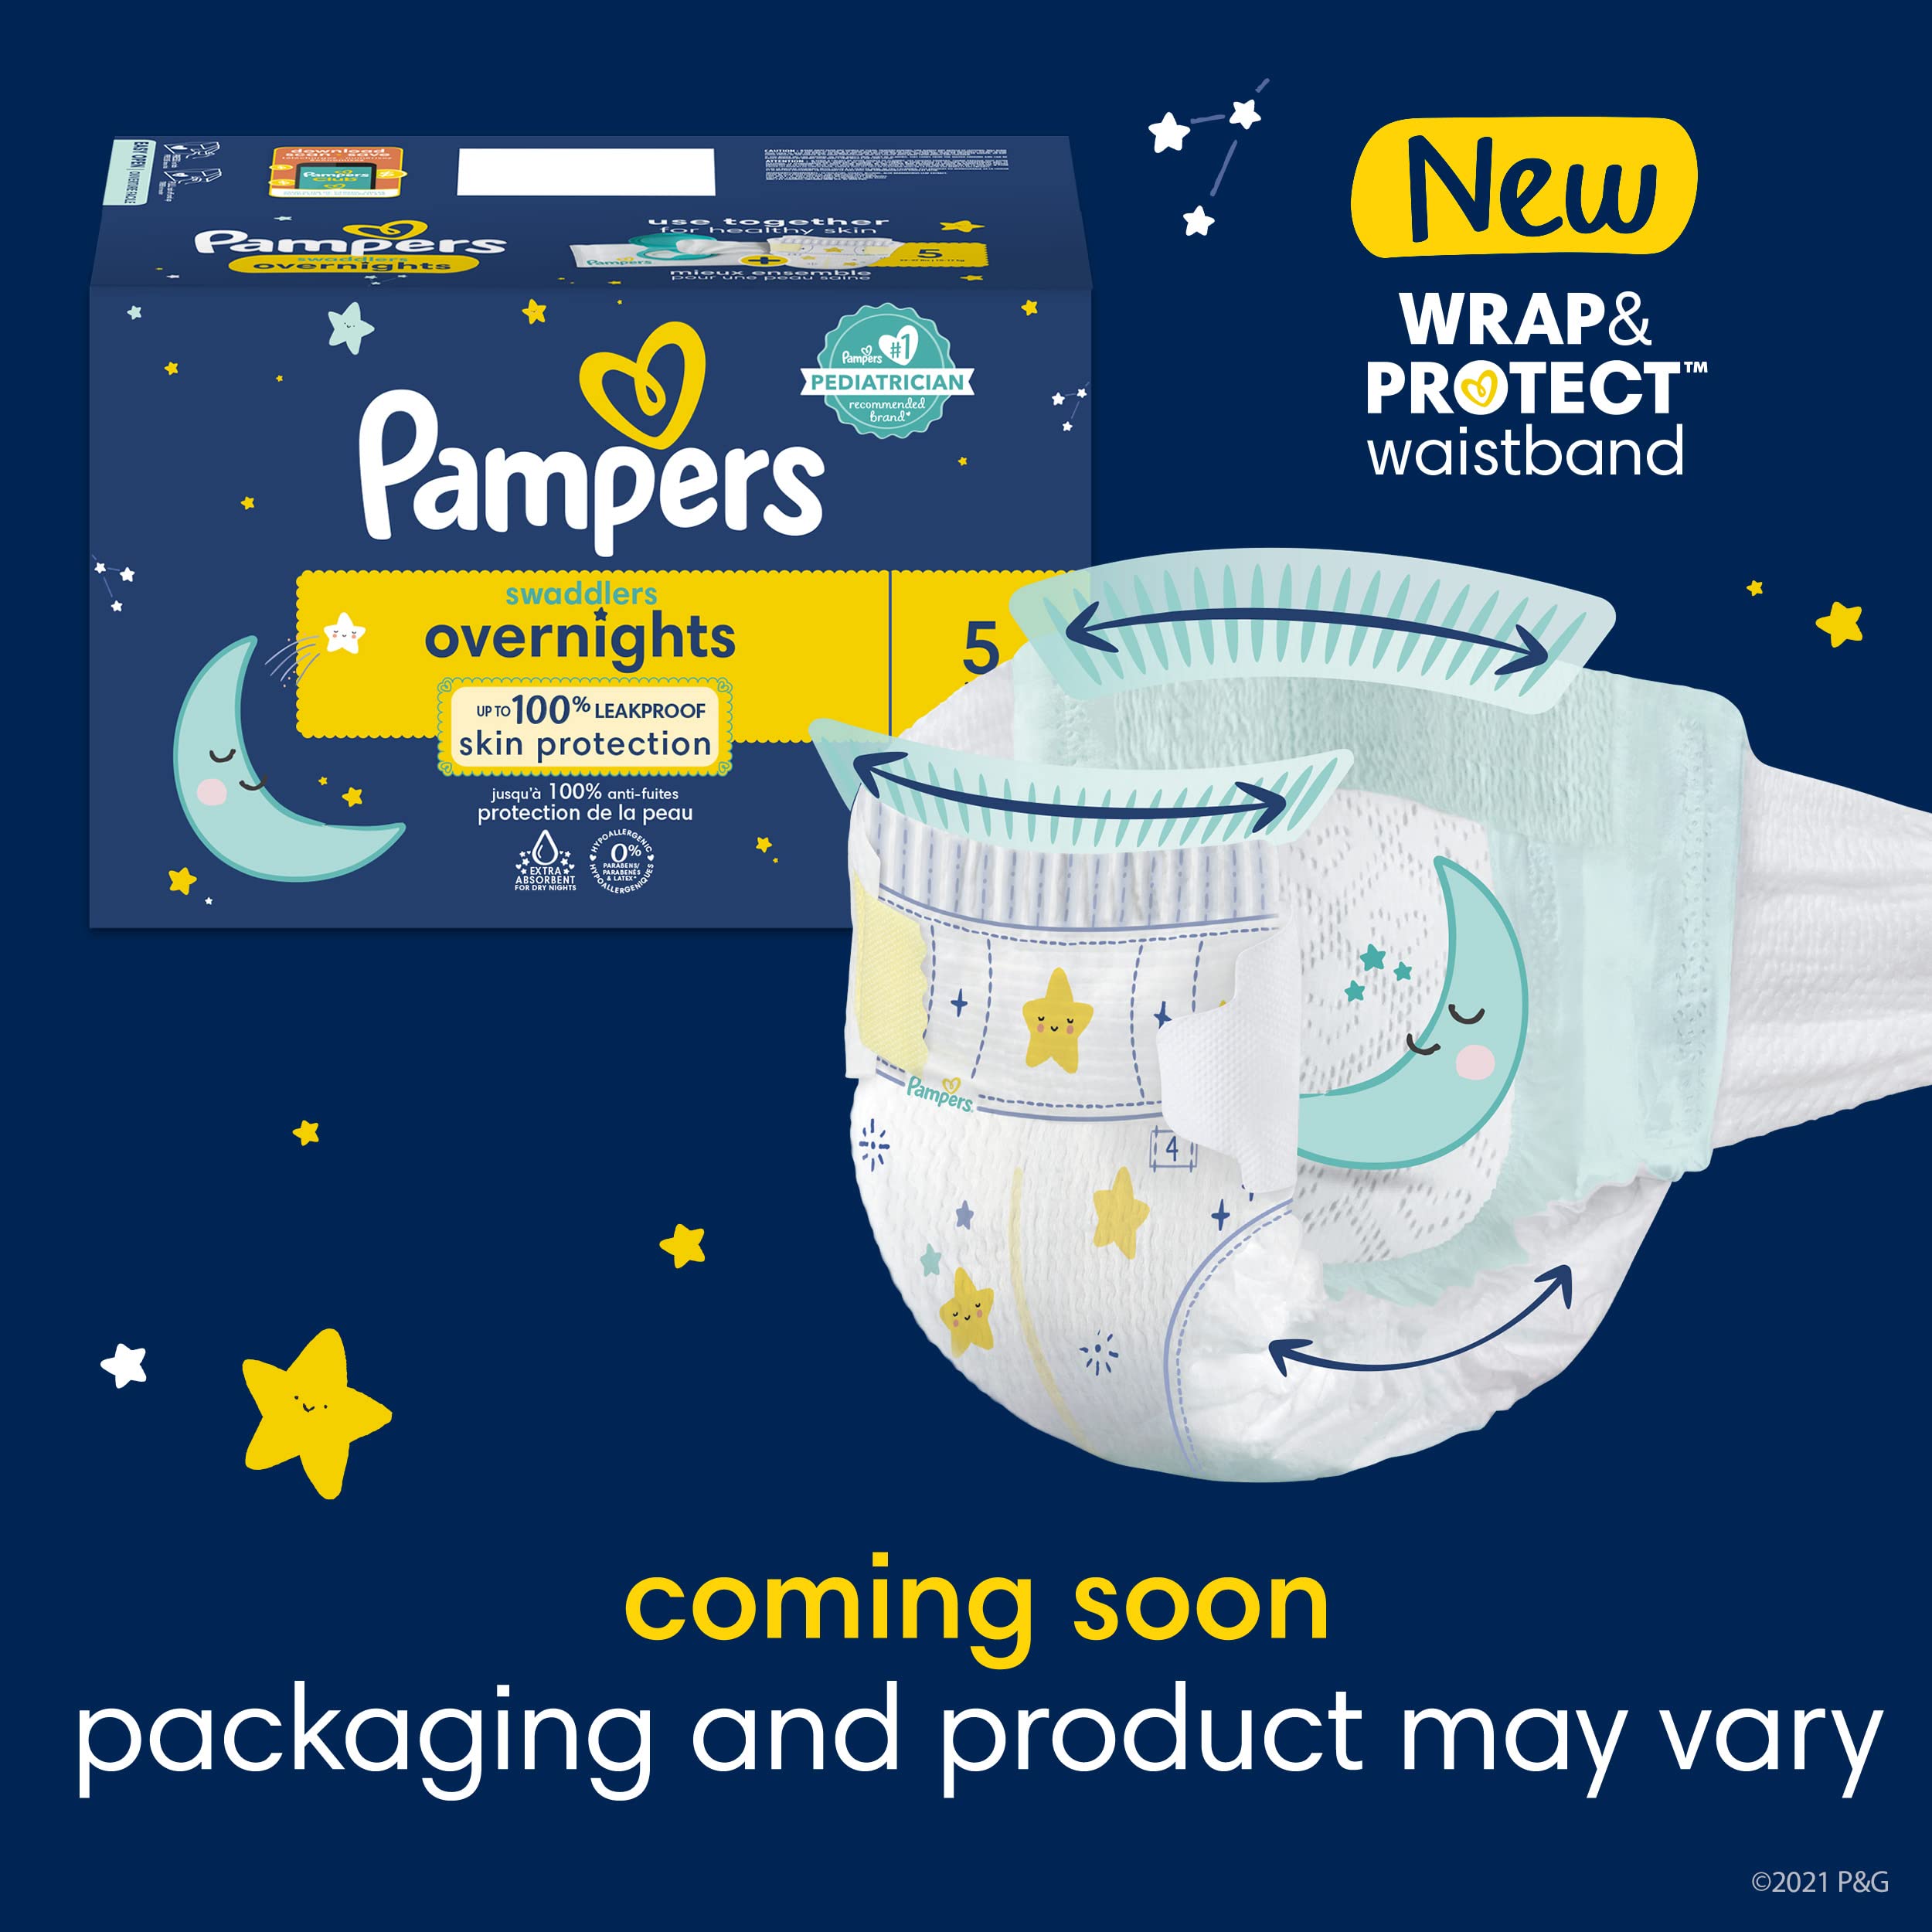 Diapers Size 3, 66 Count - Pampers Swaddlers Overnights Disposable Baby Diapers, Super Pack (Packaging & Prints May Vary)